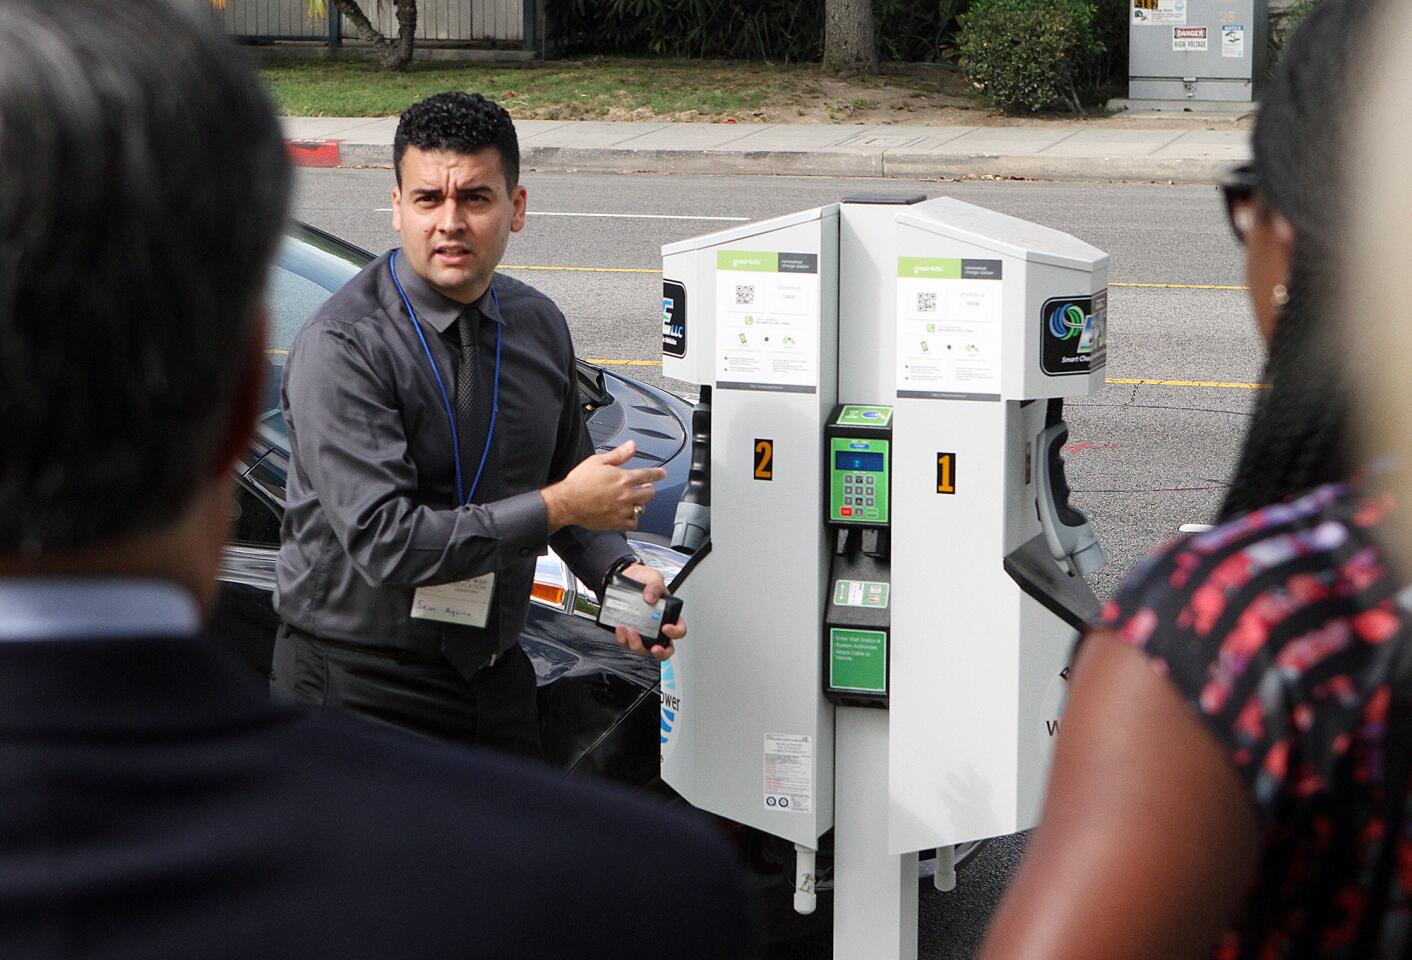 Burbank Water and Power's Sean Aquino demonstrates how an EV charging station works at a ribbon cutting for one of the eight dual-charger, electric-vehicle charging stations on Buena Vista Avenue in front of the Buena Vista Branch Library in Burbank on Tuesday, Aug. 25, 2015.